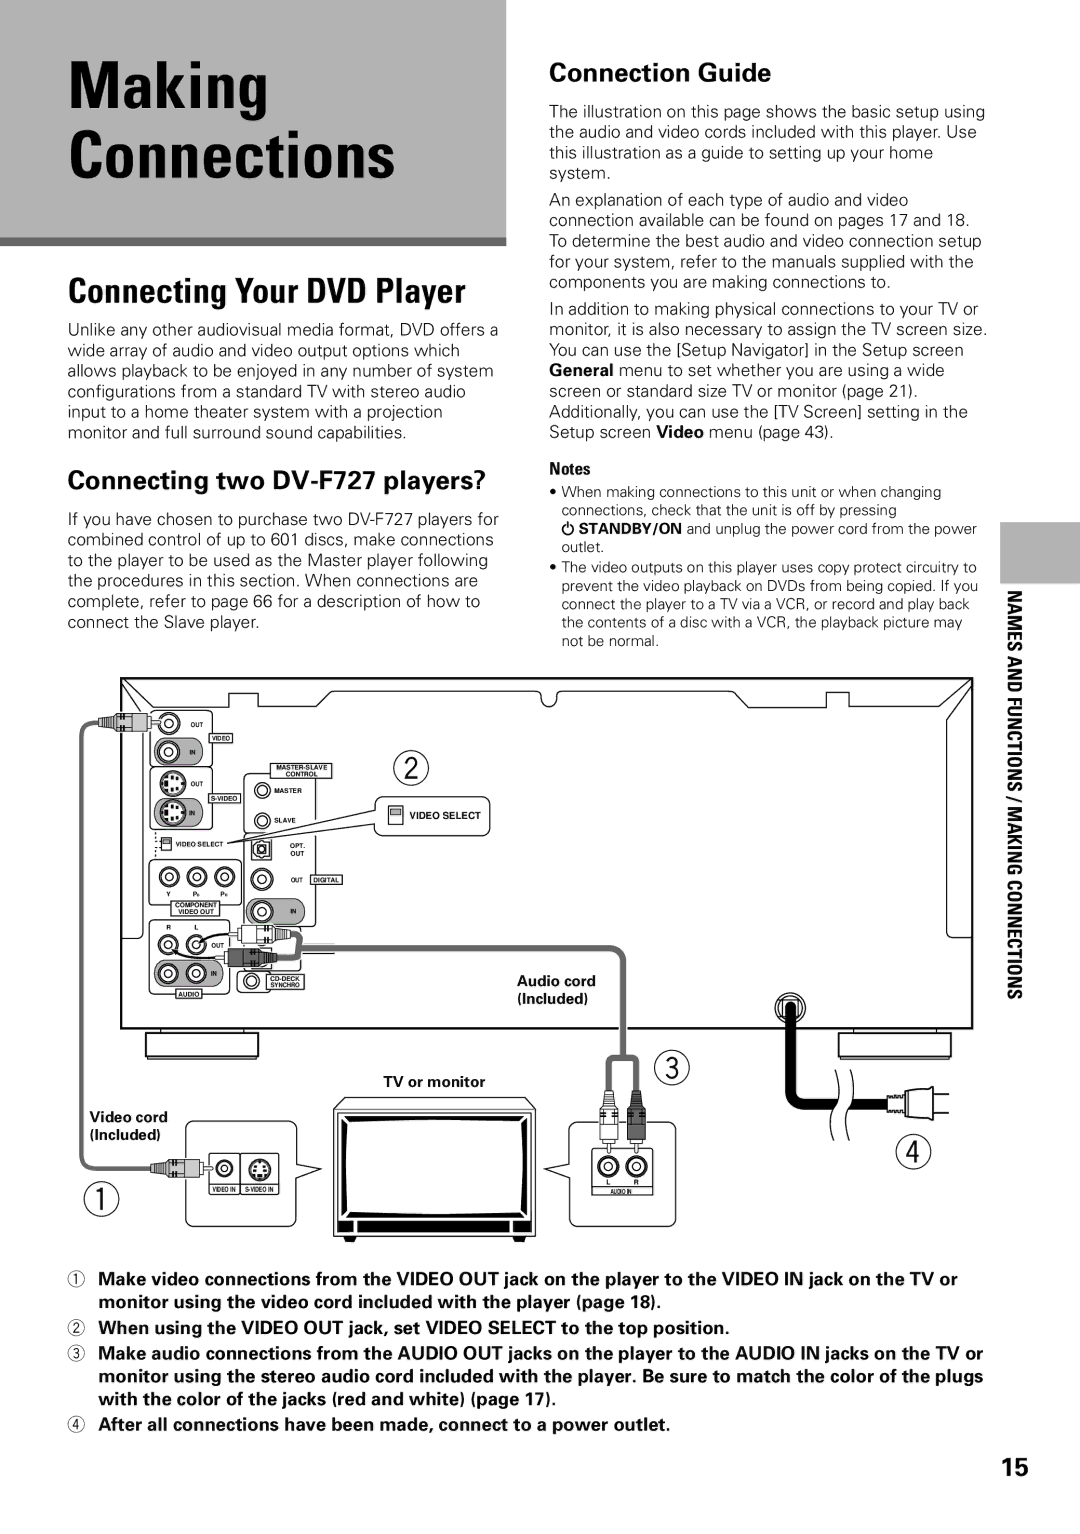 Pioneer operating instructions Connecting Your DVD Player, Connection Guide, Connecting two DV-F727 players? 